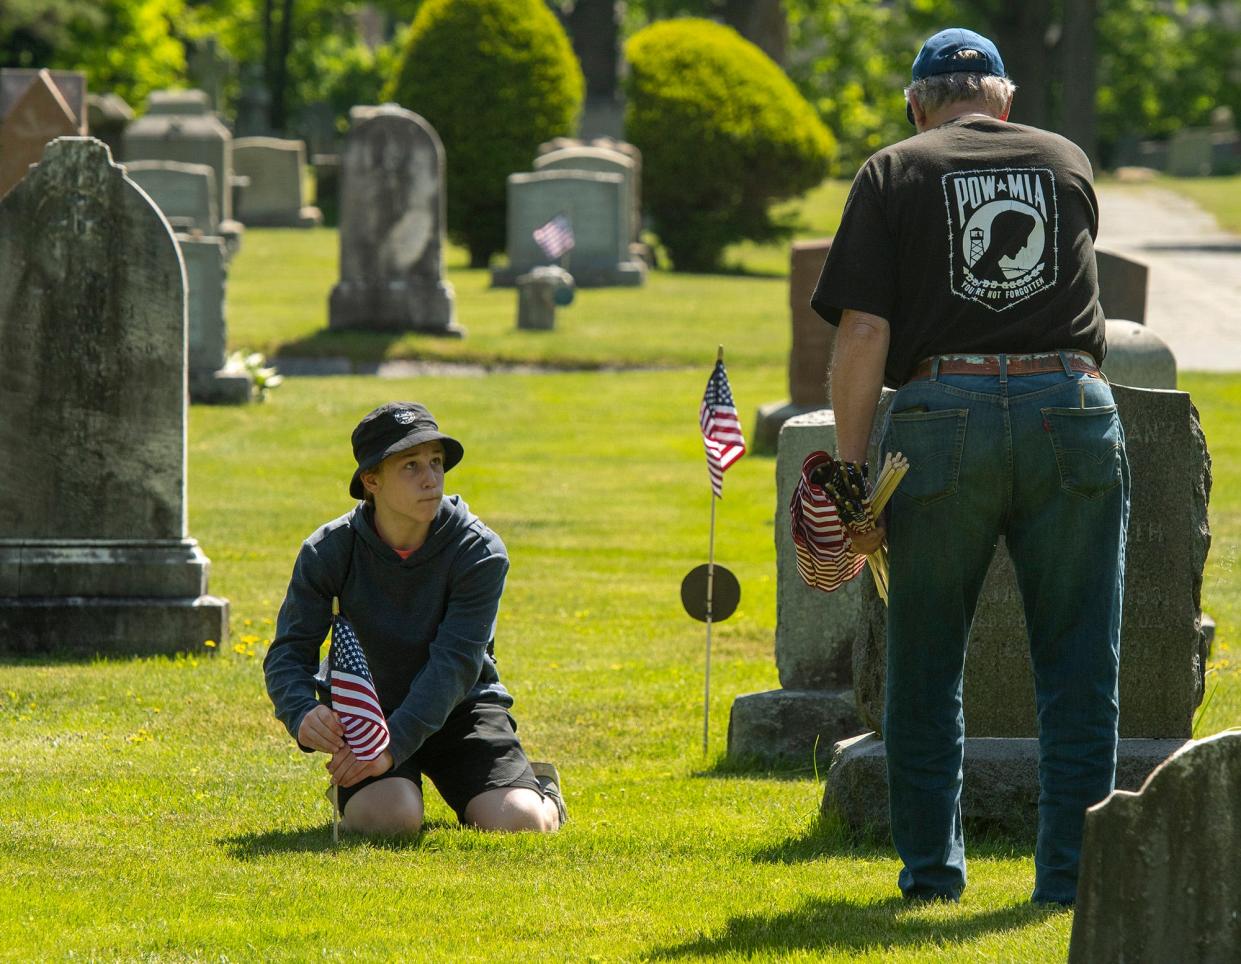 Declan Grenache, 15, decorates the graves of veterans for Memorial Day with his grandfather Harry Sechman at St. John's Cemetery Wednesday. Sechman, of Rutland, is a veteran of the U.S. Marine Corps and brought five of his six grandchildren to help the decoration effort. Volunteers from area veterans' groups, the Worcester County Sheriff's Office, and local businesses placed 5,000 American flags on graves in the cemetery.